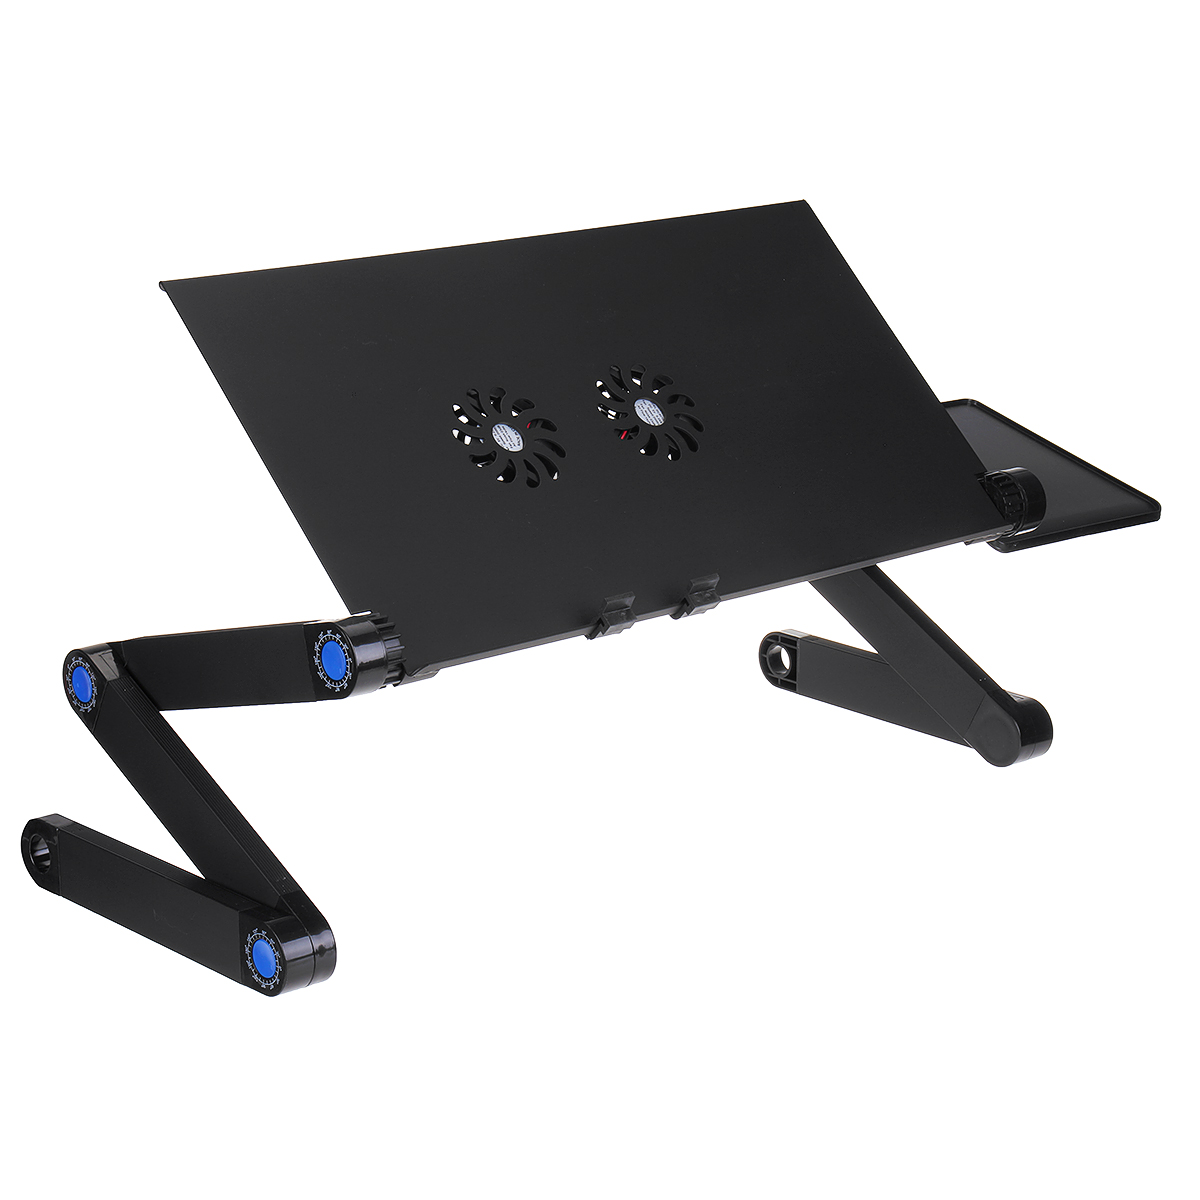 Cooling-Laptop-Desk-360-Degree-Aluminum-Alloy-Adjustable-Foldable-Cooling-Notebook-Table-for-Sofa-Be-1786133-14